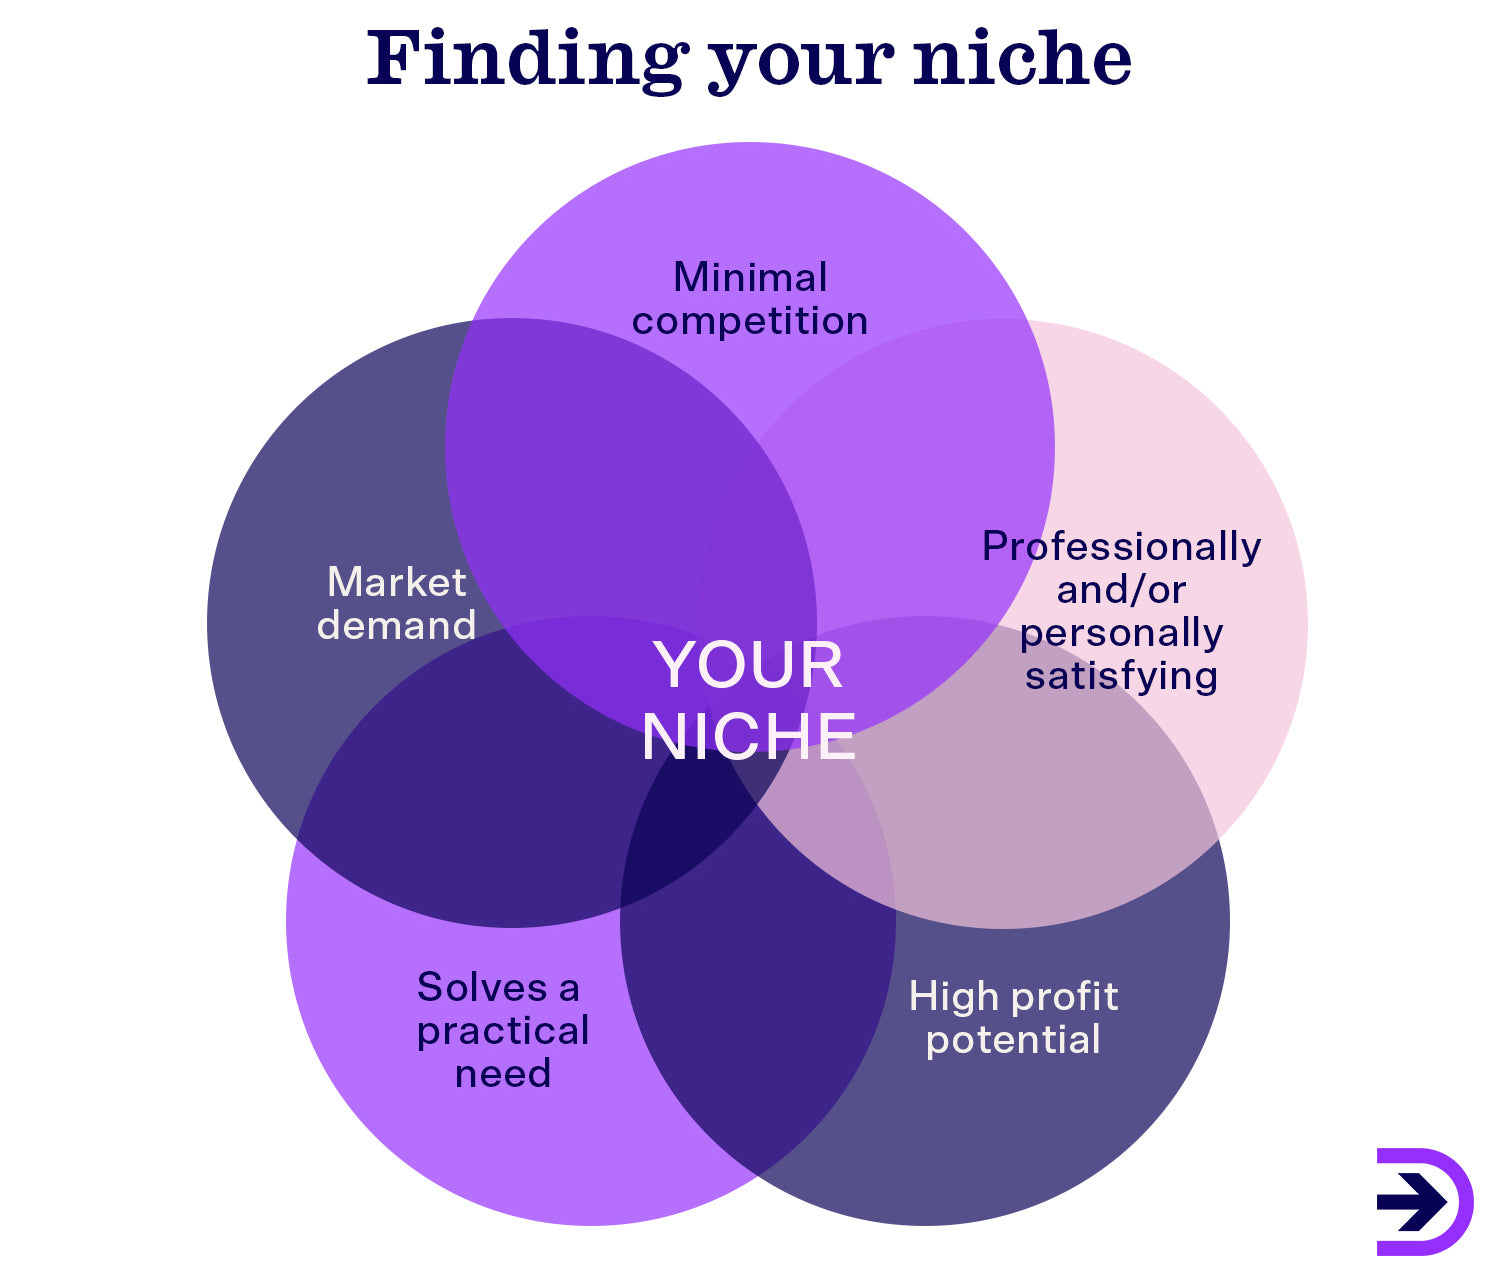 Discover your niche by evaluating your target audience and where there is a market gap.